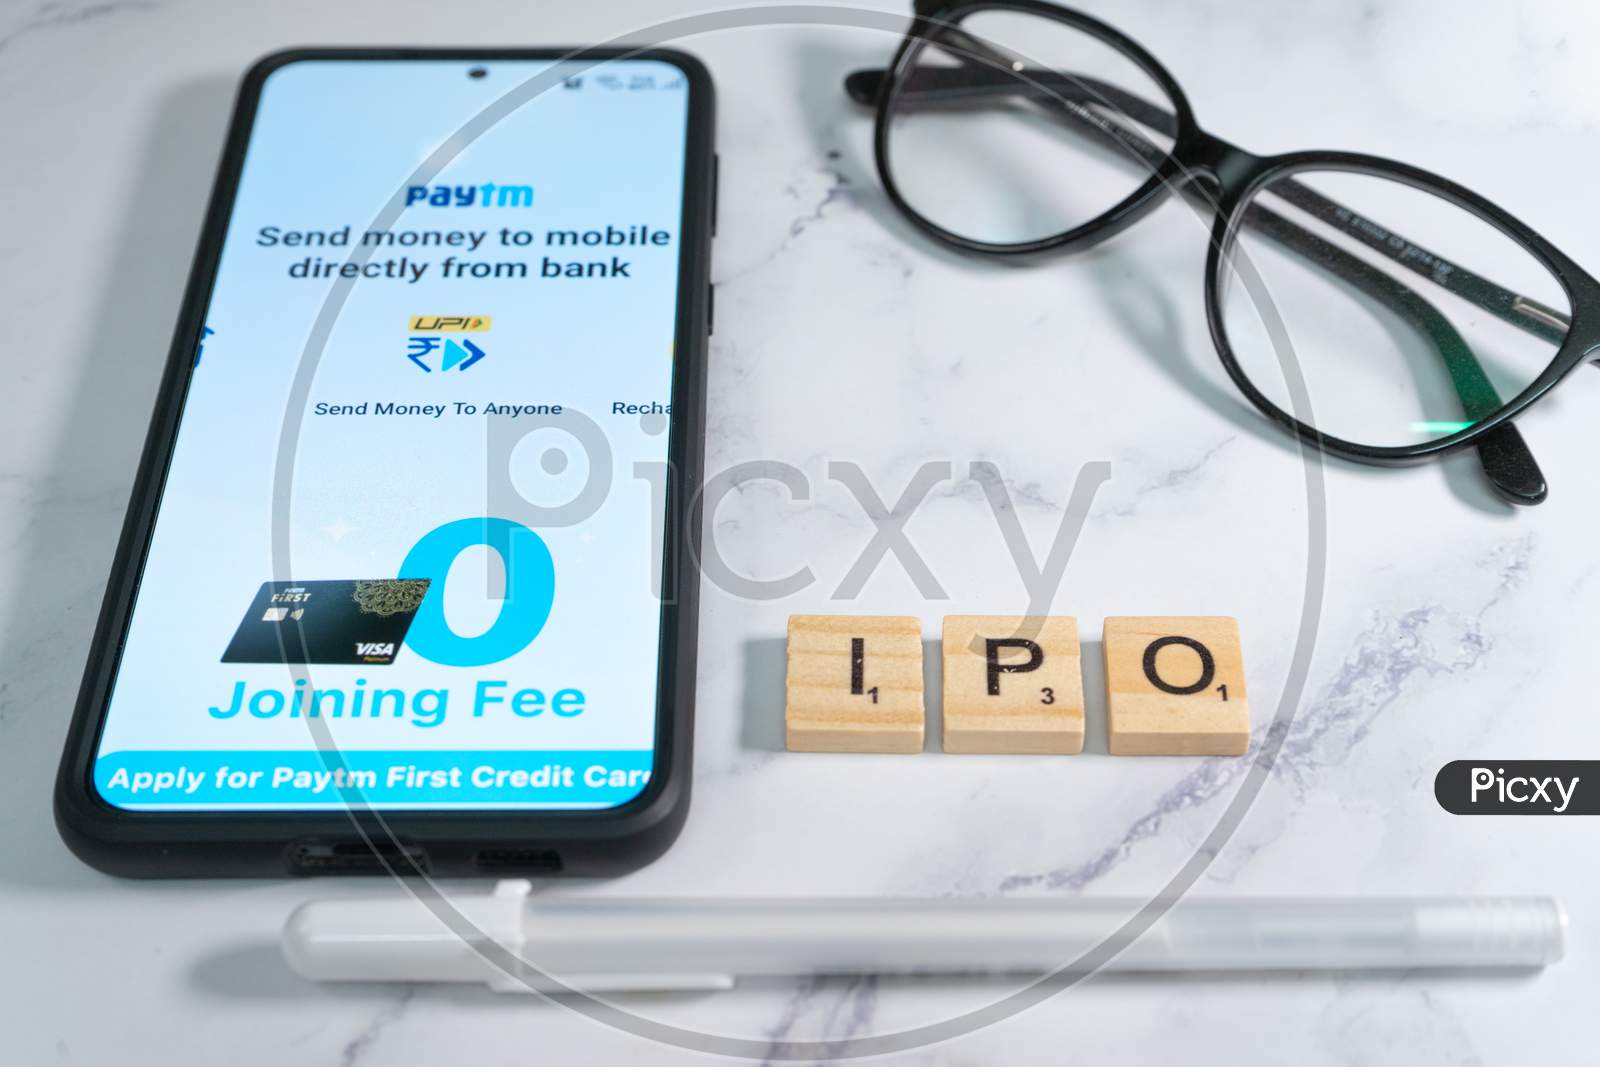 Paytm Logo Screen On Mobile Phone With Pen And Spectacles Placed Nearby Showing The Ipo Of The Indian Startup Unicorn Decacorn Payment Services Provider For Cashless Payment